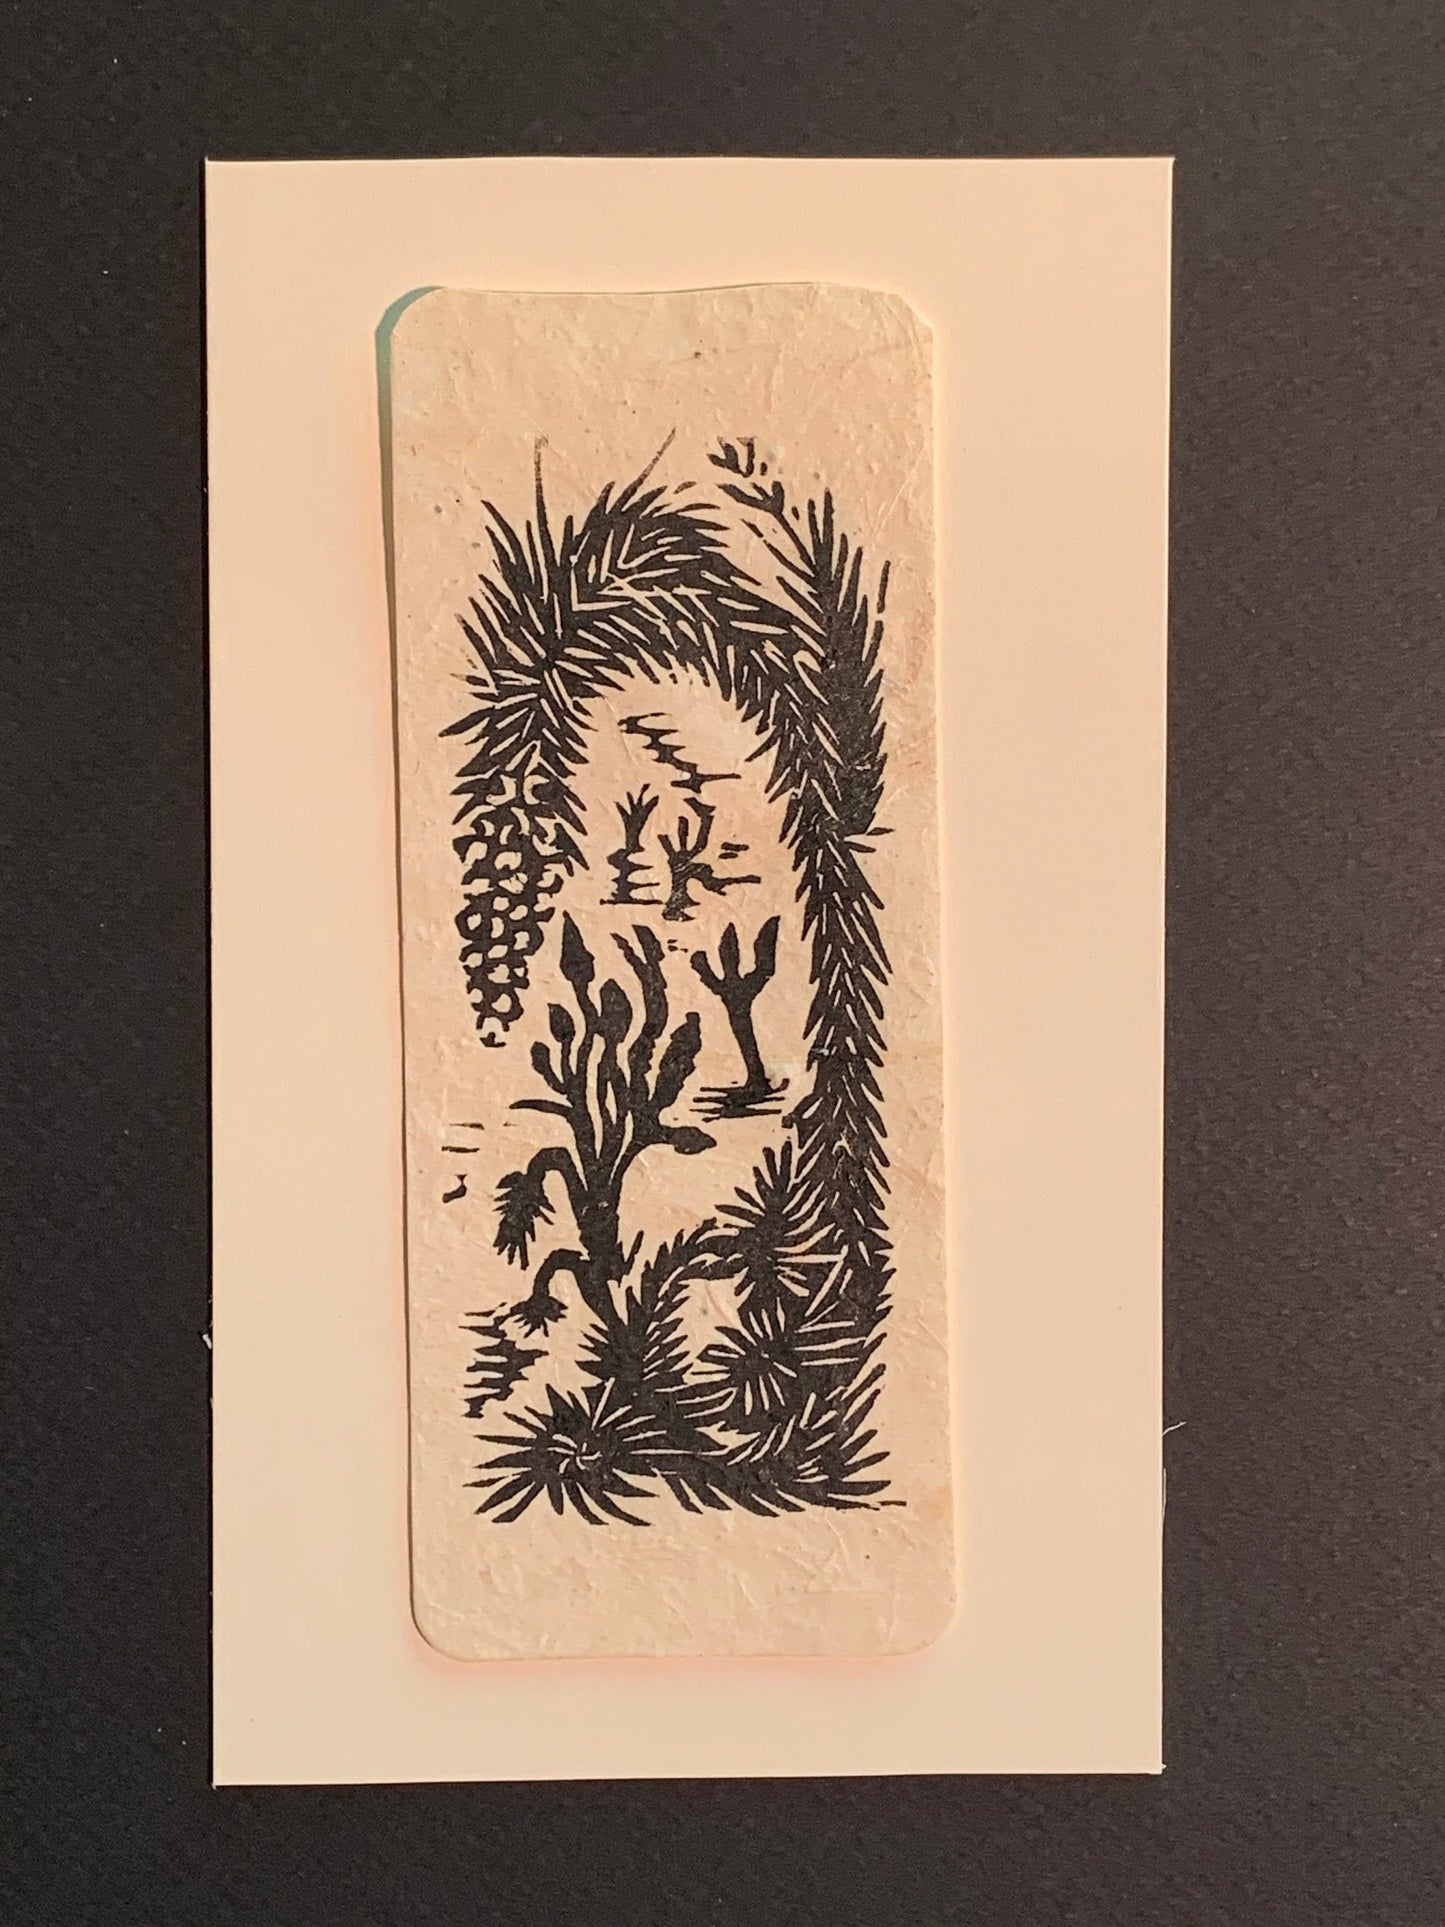 Joshua Tree Small Original Woodcut from Desert Trees Landscape Collection